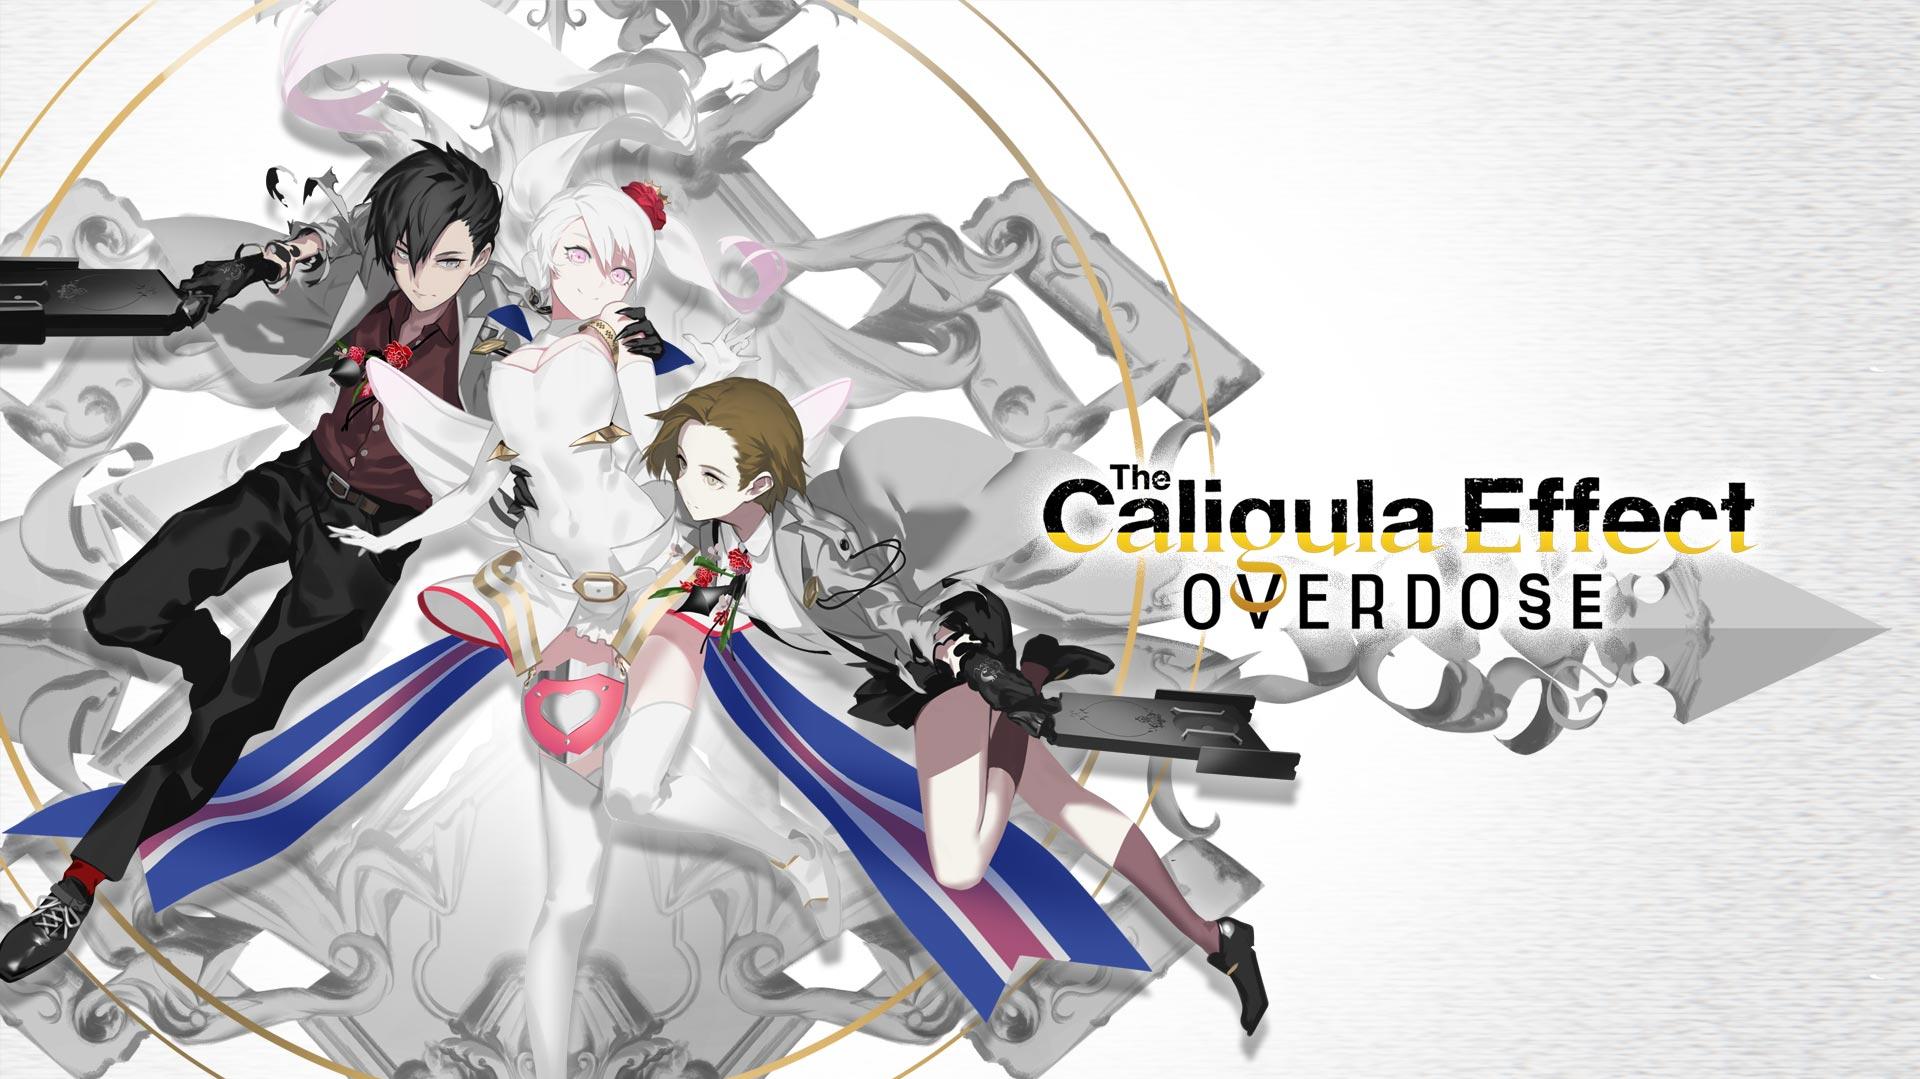 Final Weapon On X The Caligula Effect Overdose Launches May